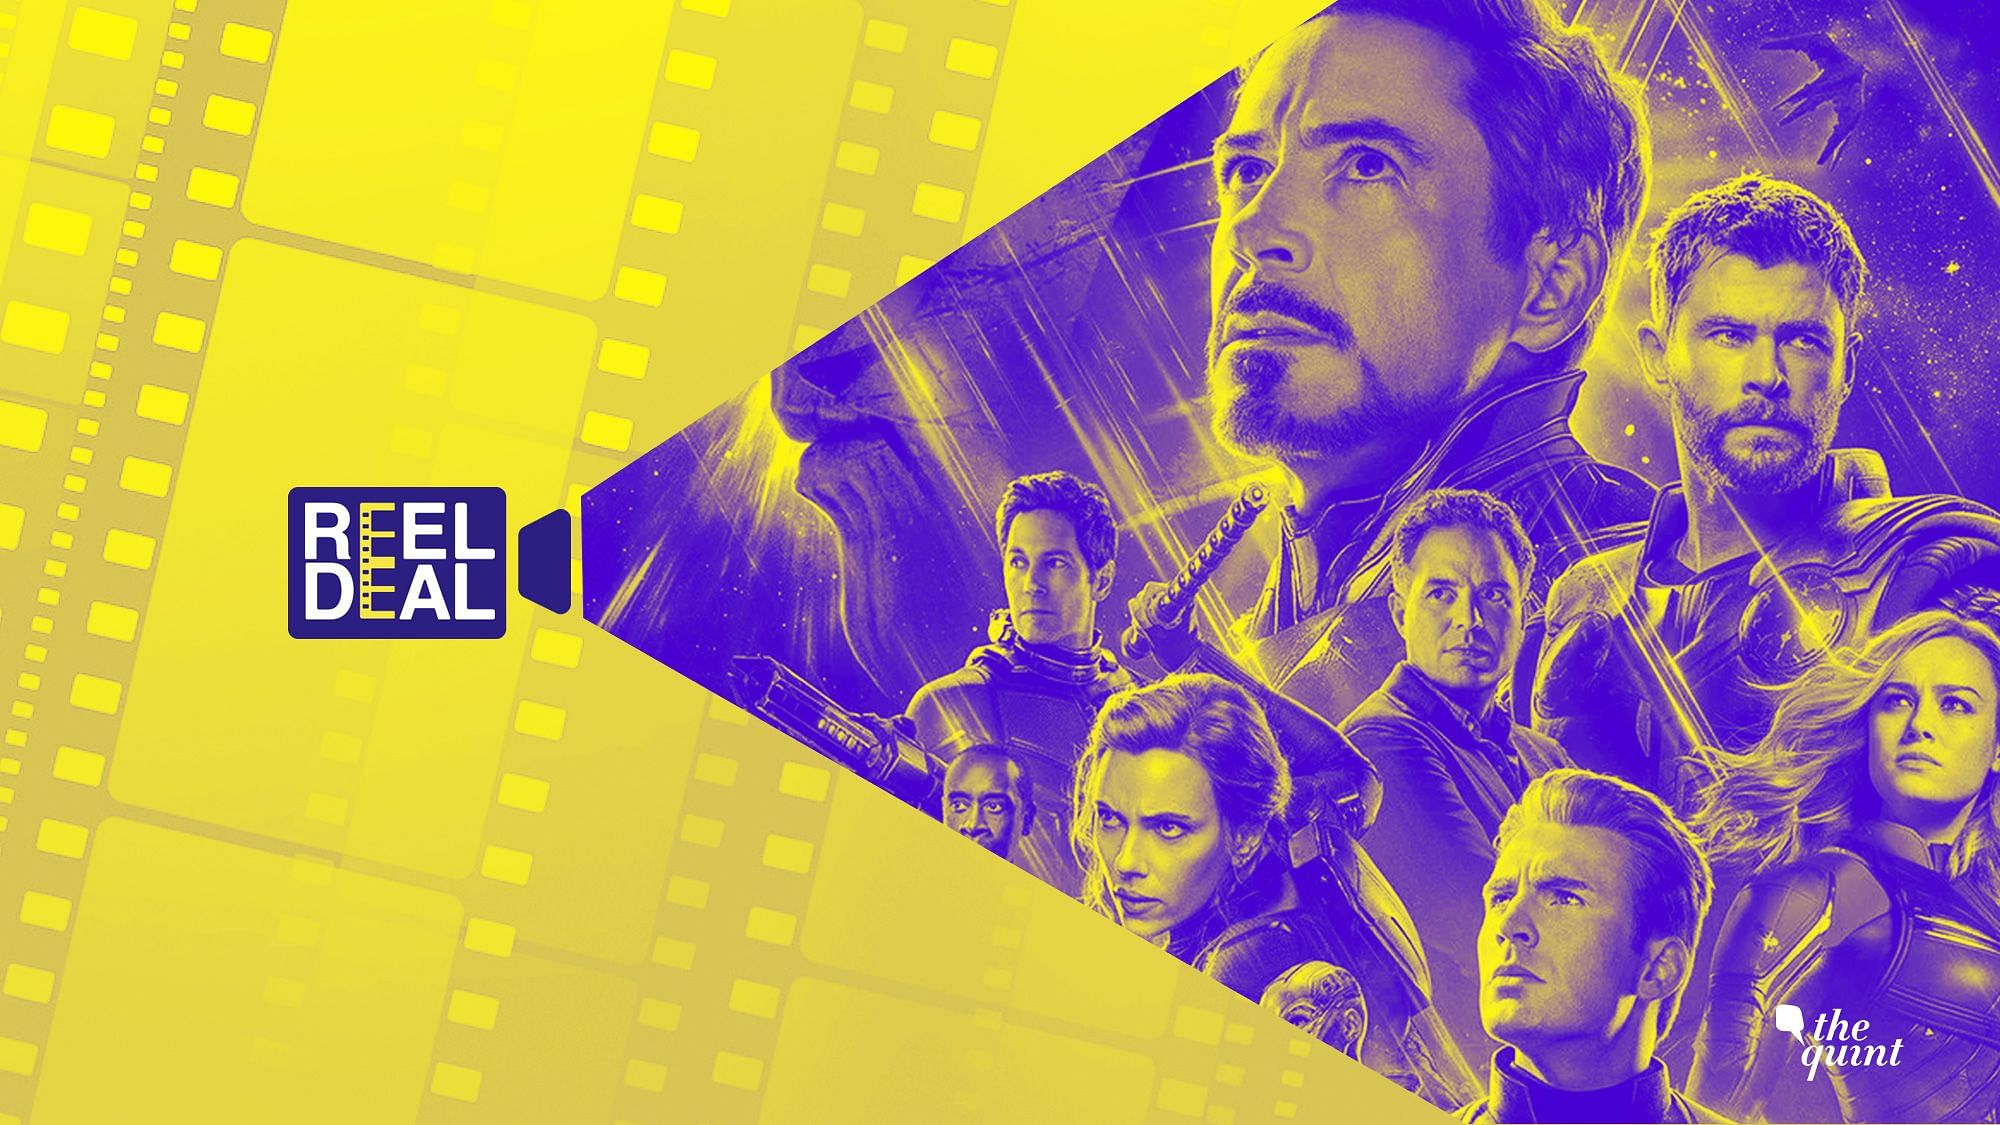 In our first episode of the Reel Deal podcast, we discuss all things Avengers: Endgame.